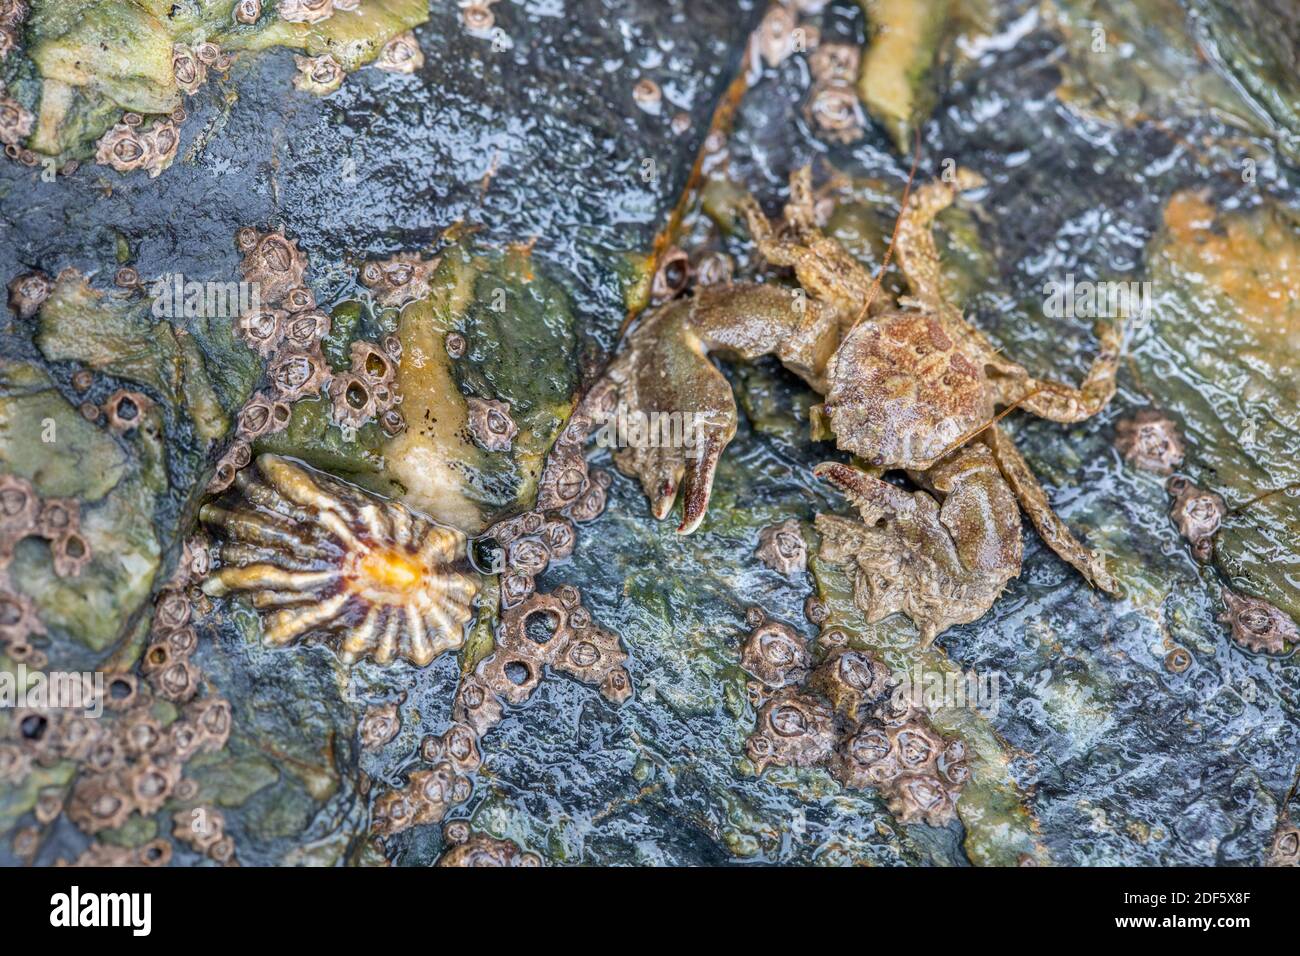 Broad Clawed Porcelain Crab; Porcellana platycheles; UK Stock Photo